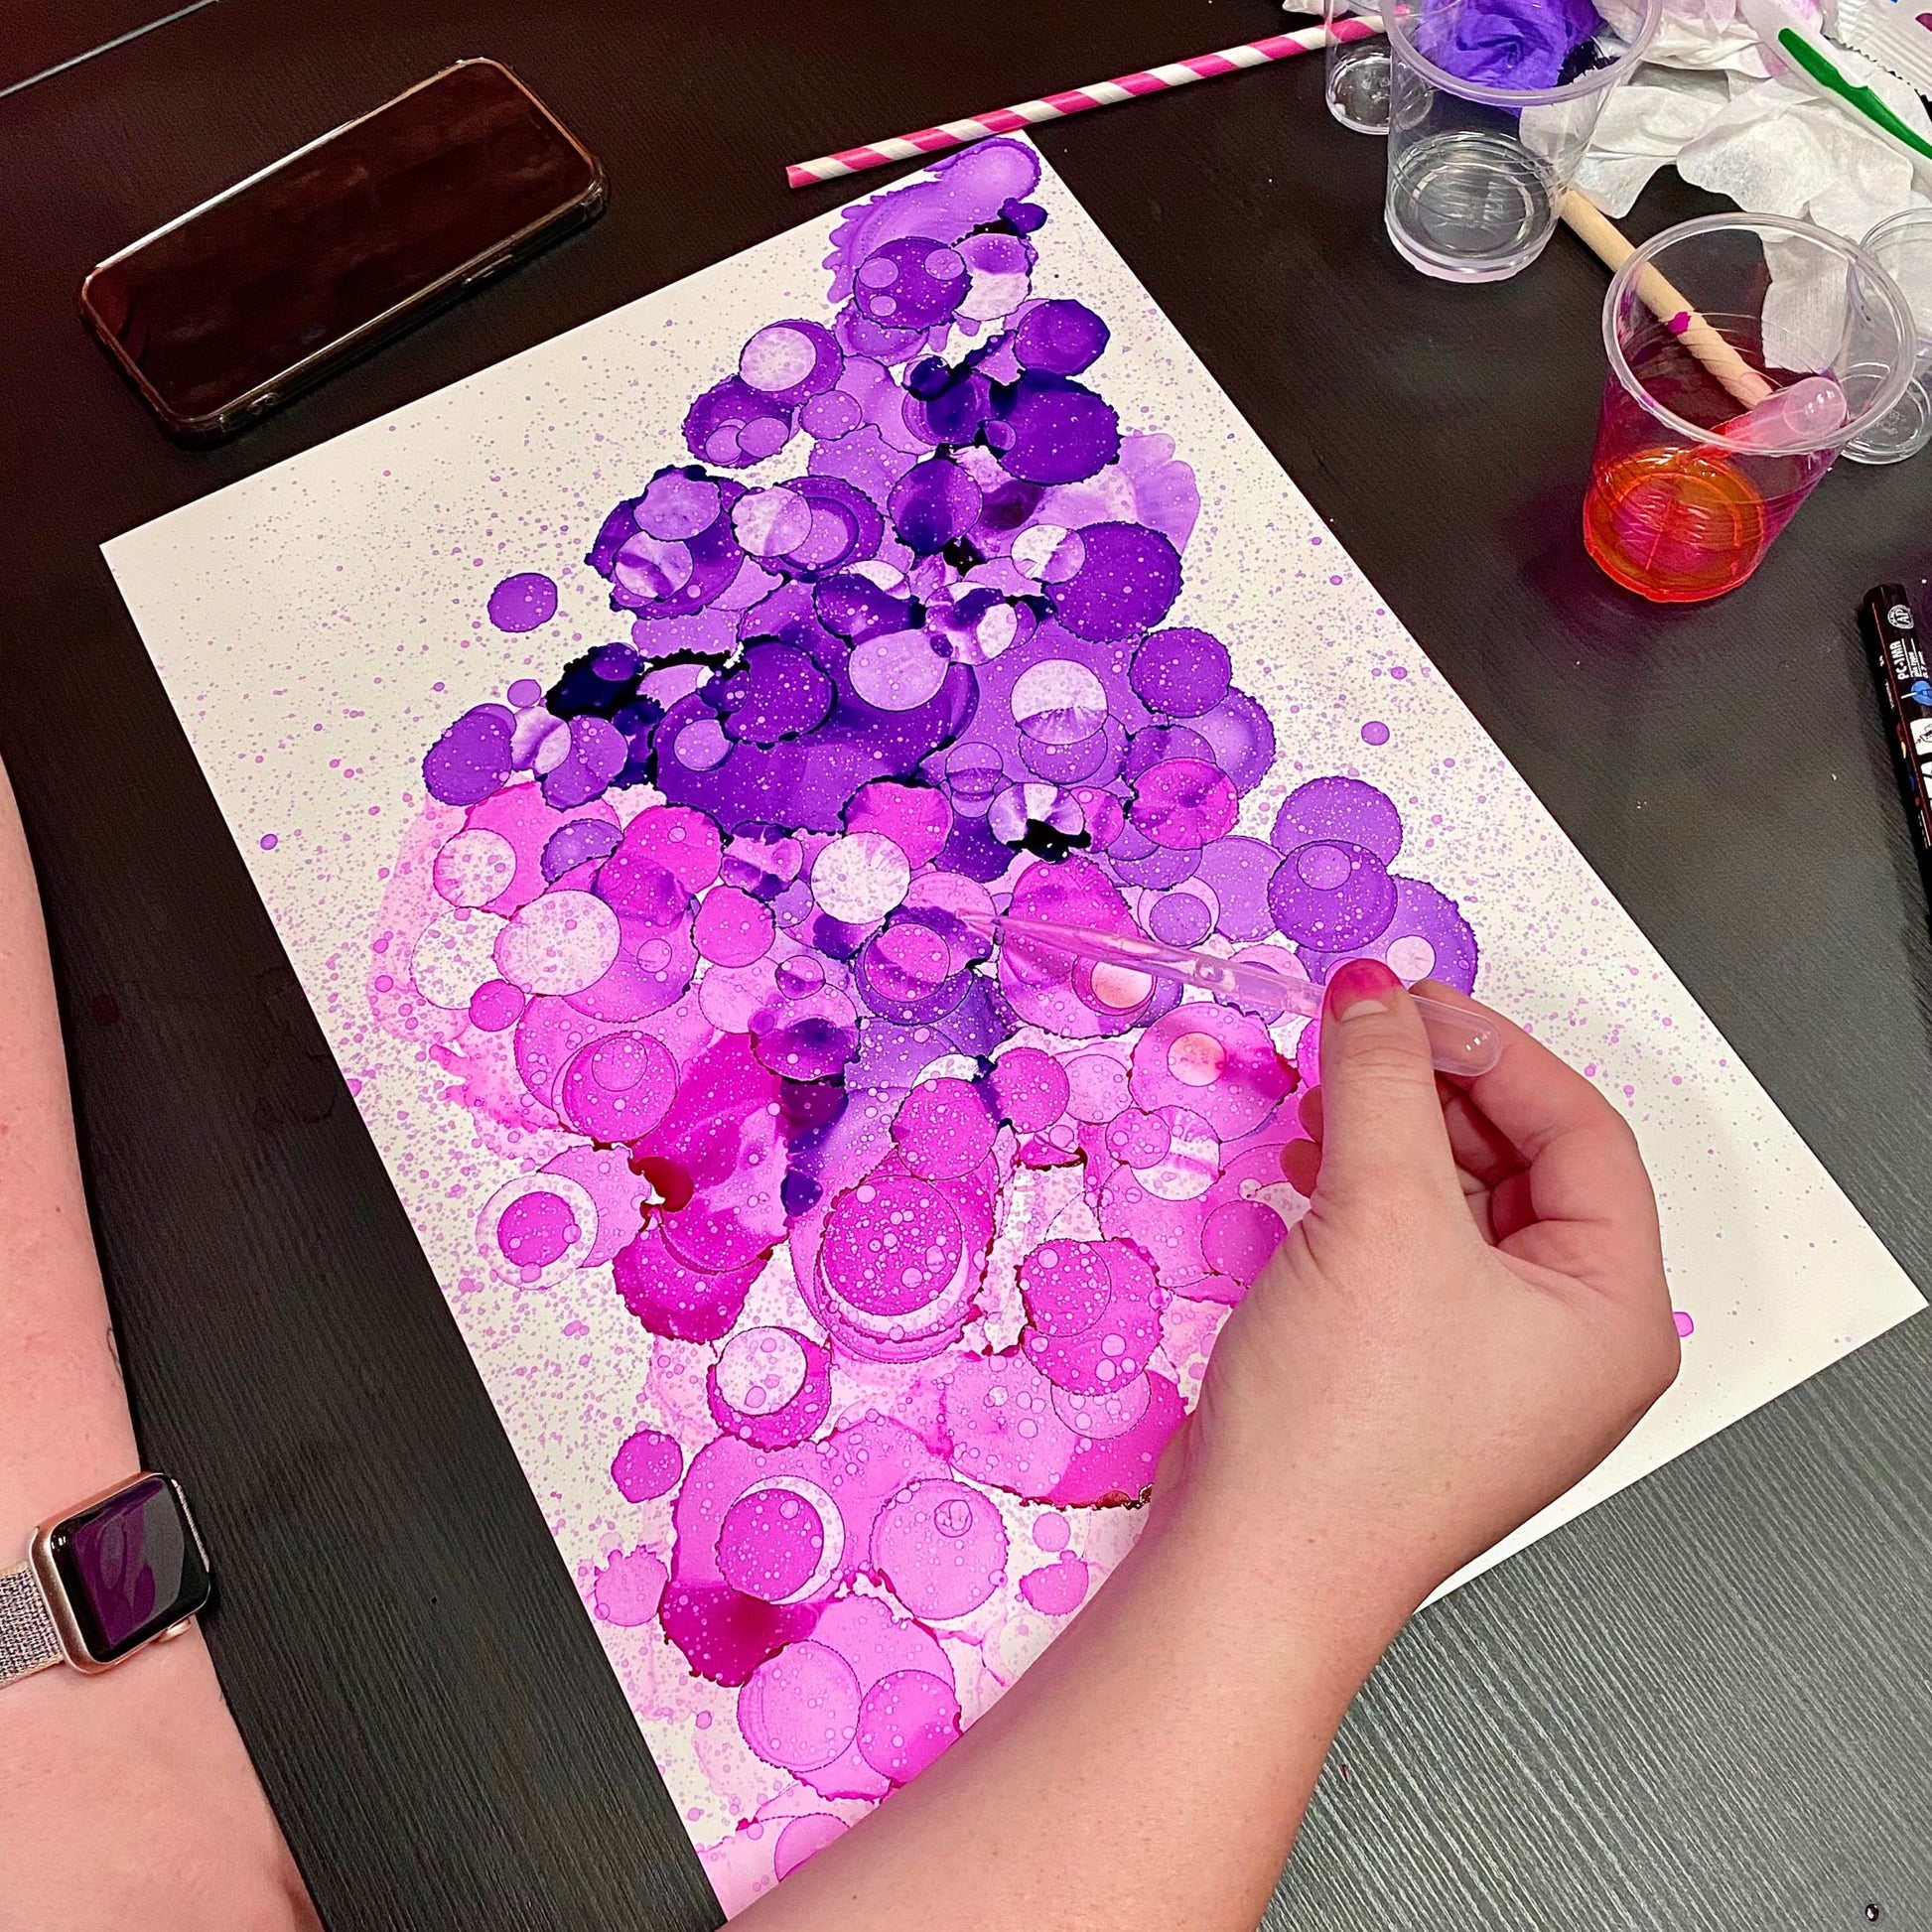 pink and purple alcohol inks dotted on the paper